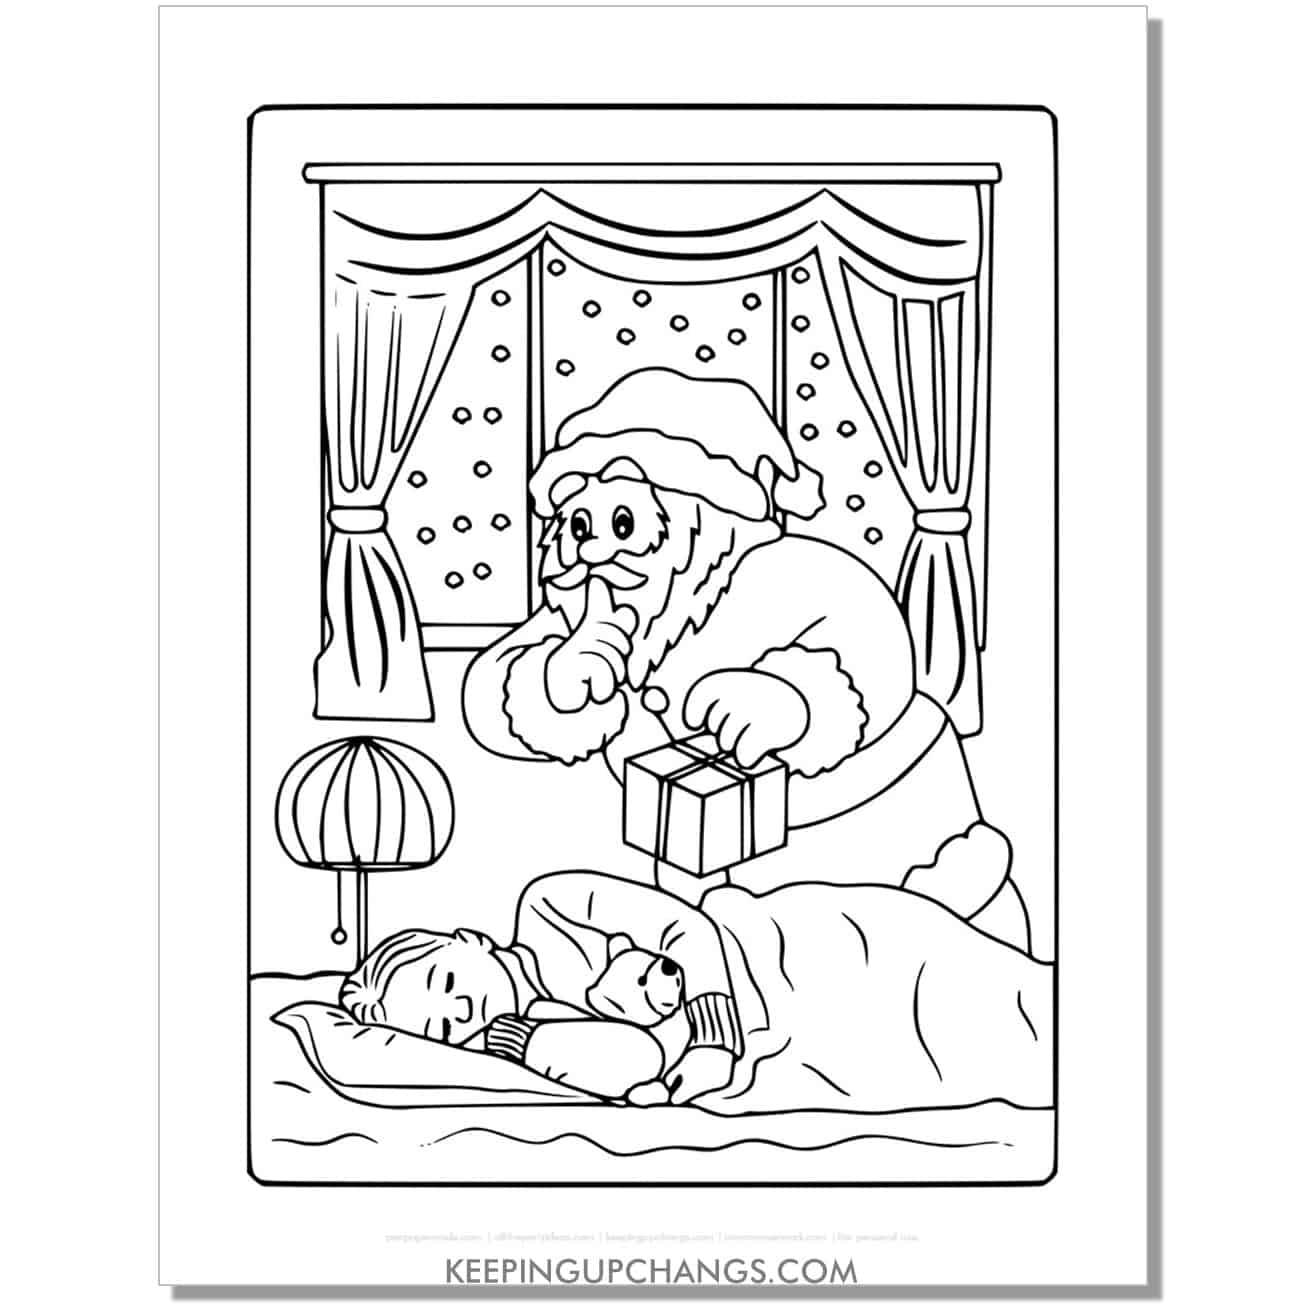 free full size santa with kids sleeping coloring page.